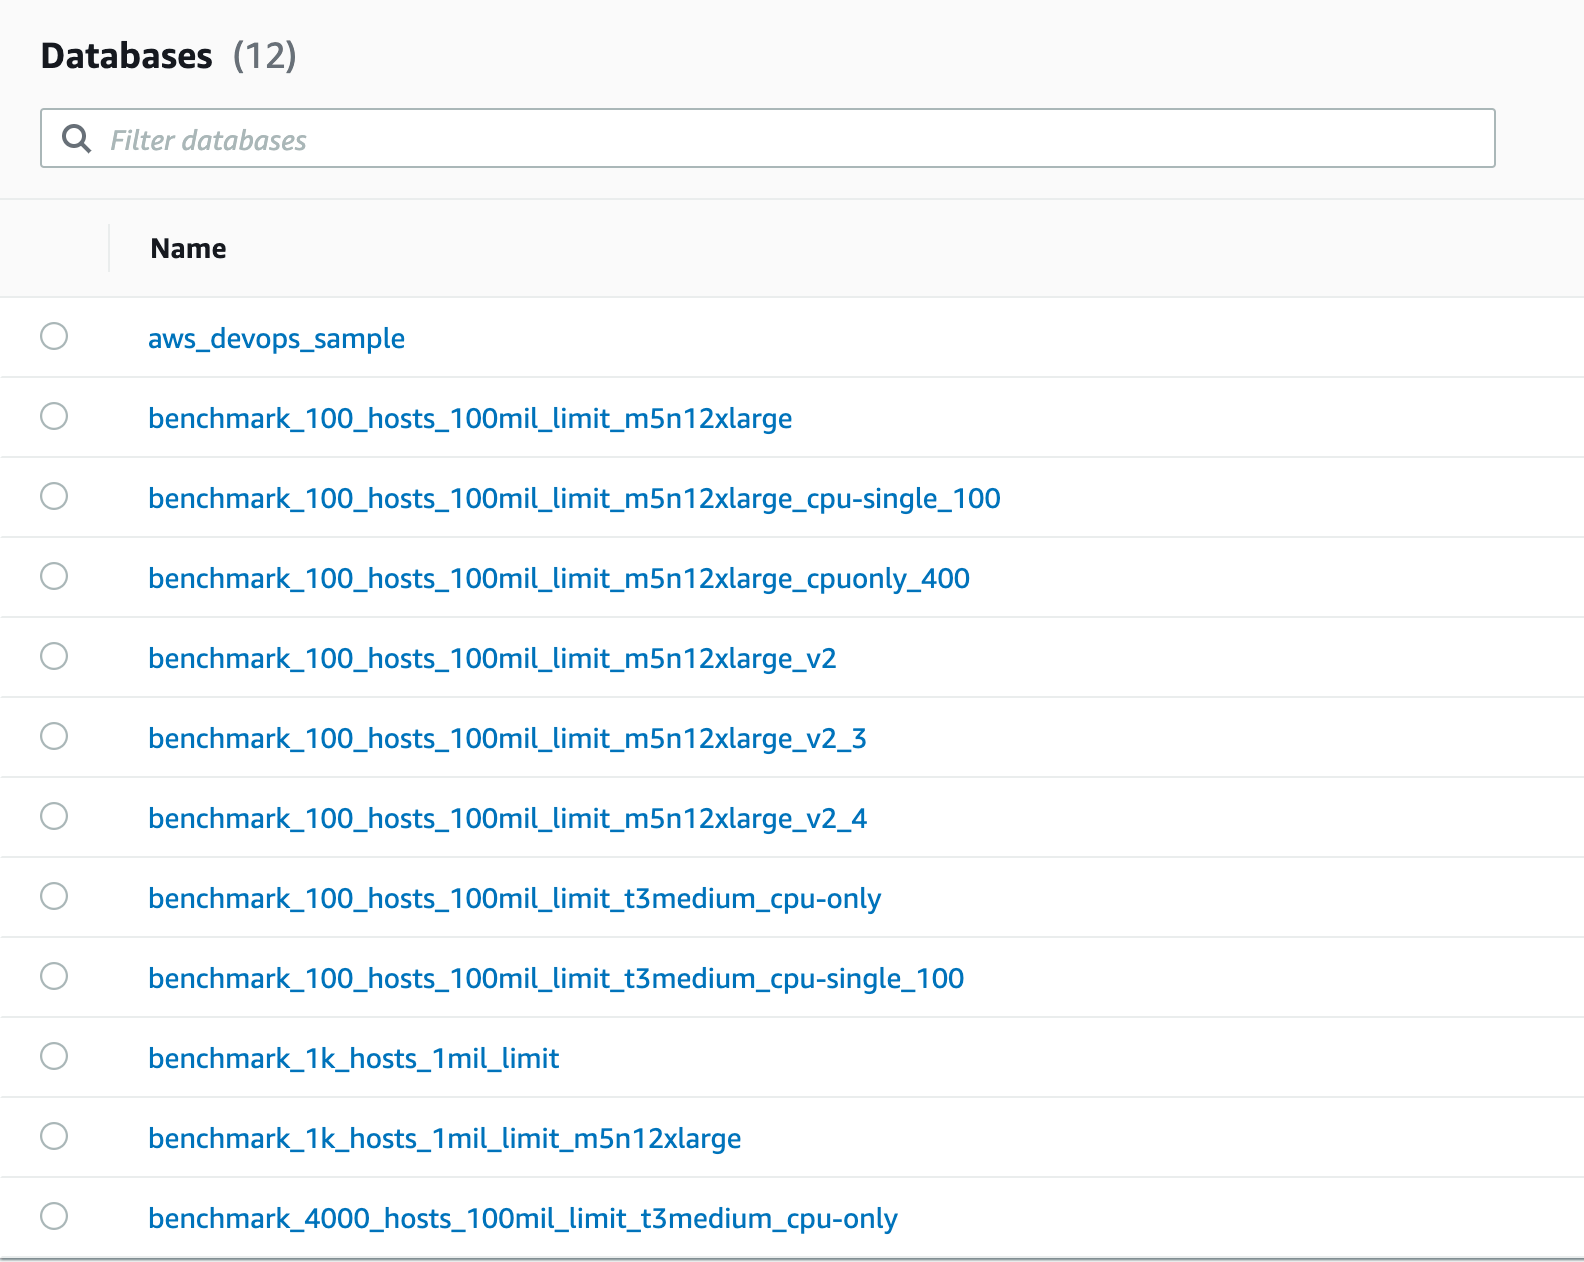 Screenshot of Amazon Timestream UI showing list of databases created during benchmarking process